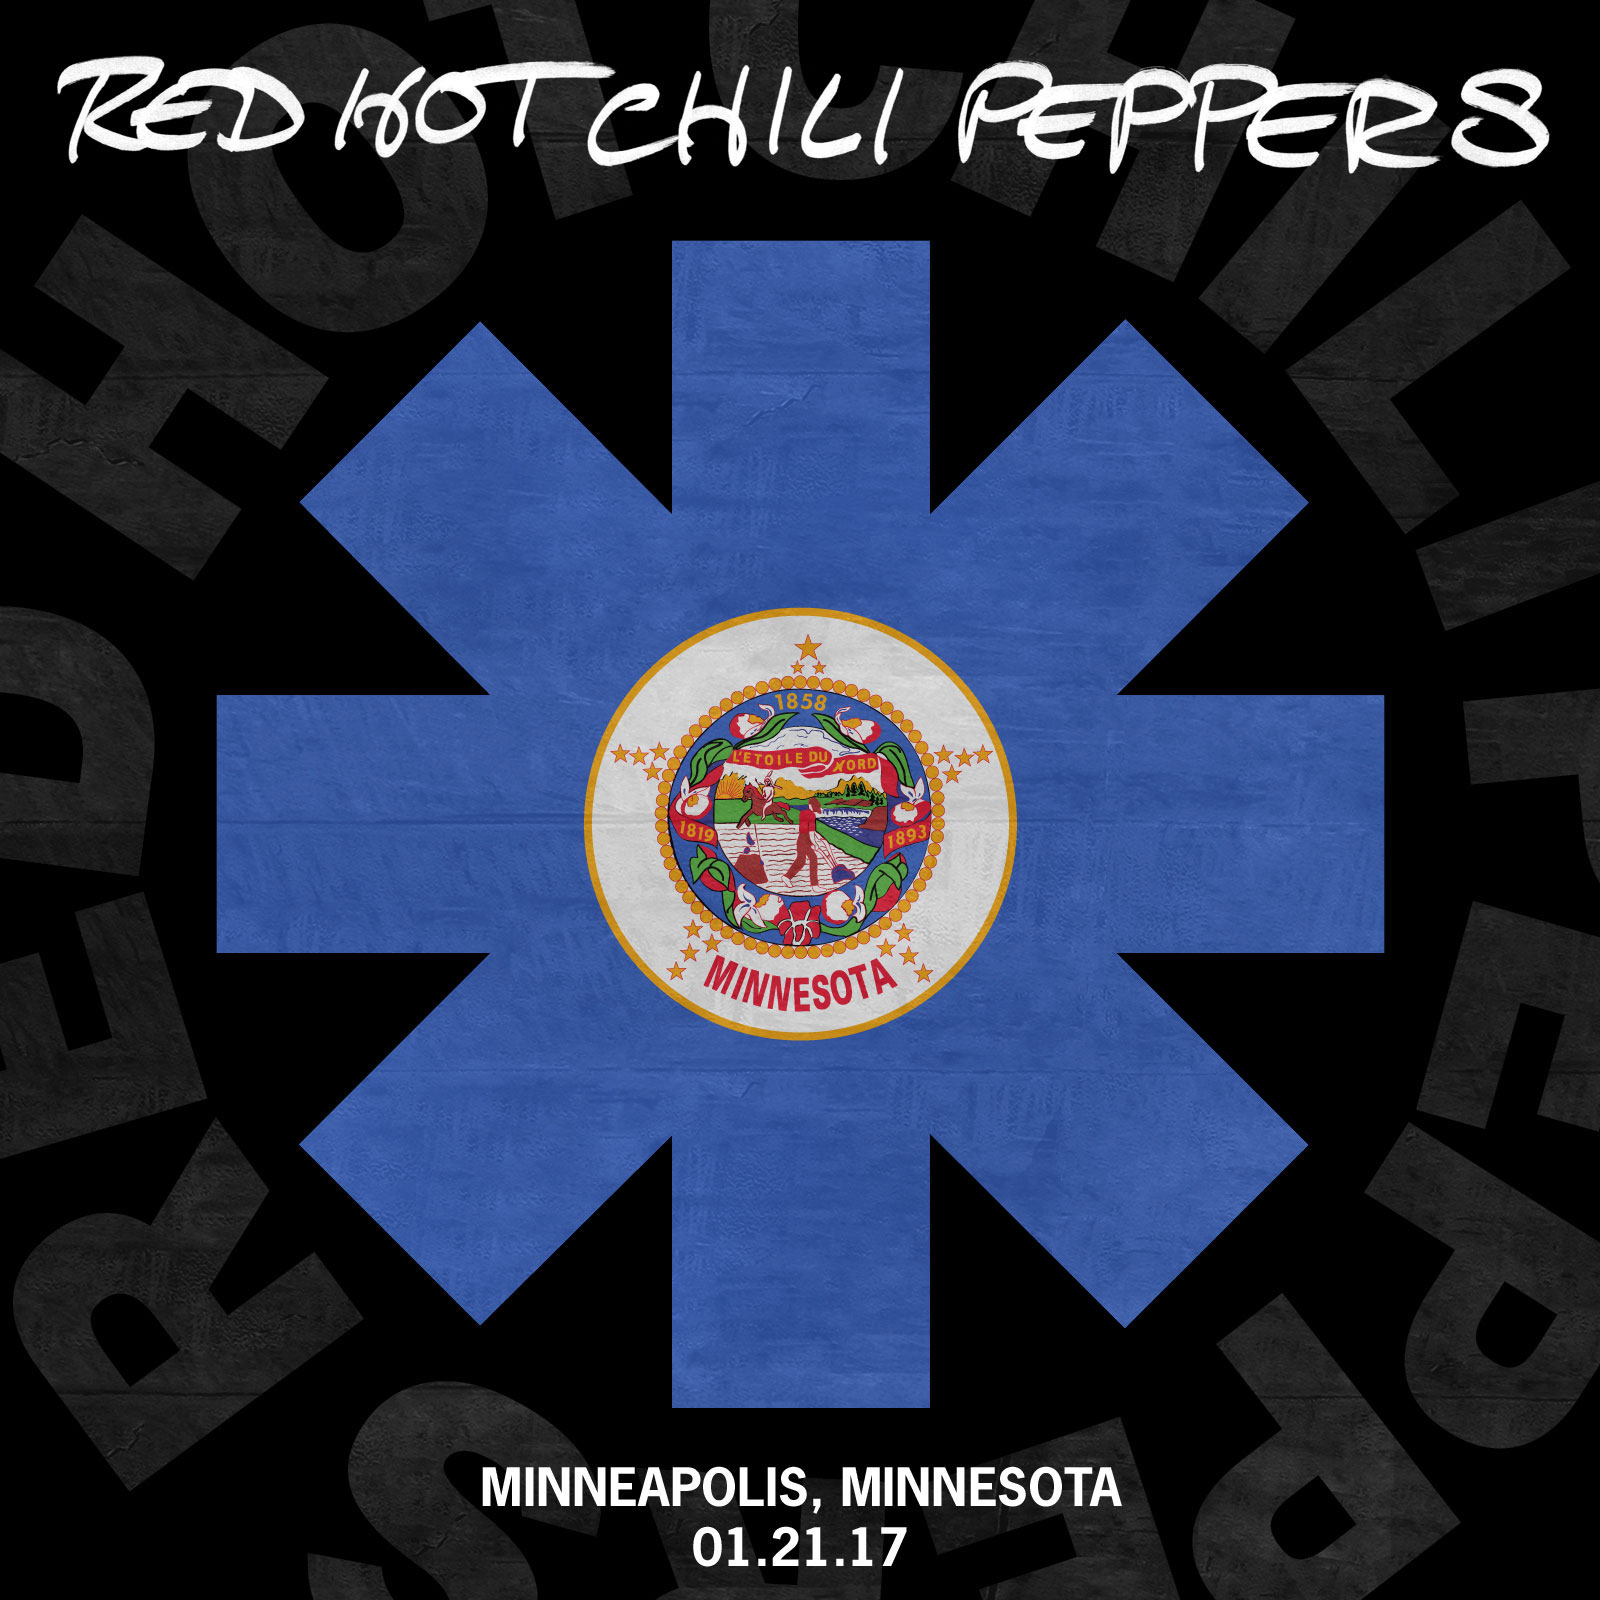 Peppers scar. Scar Tissue Red hot Chili Peppers. RHCP scar Tissue. Патч Red hot Chili Peppers. RHCP Californication.